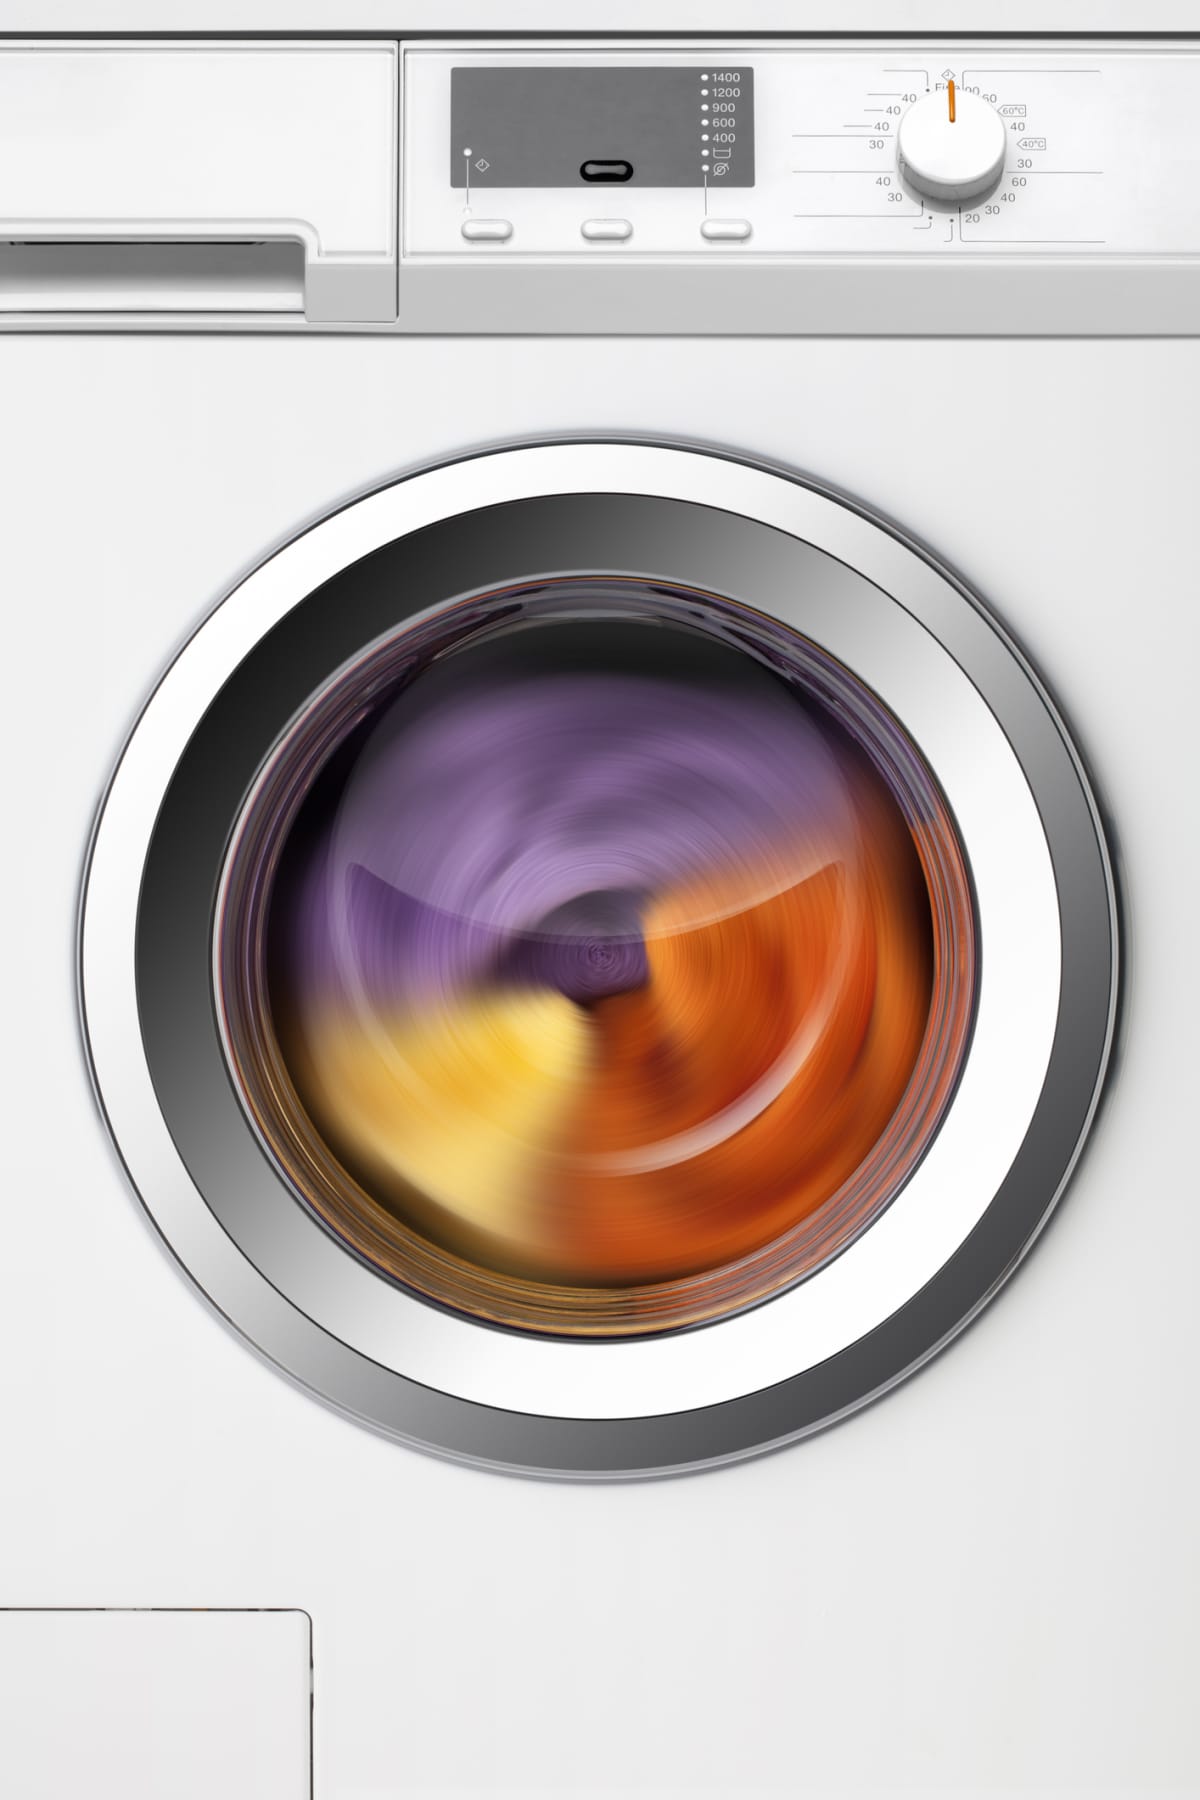 Washing machine with rotating colorful clothes inside.